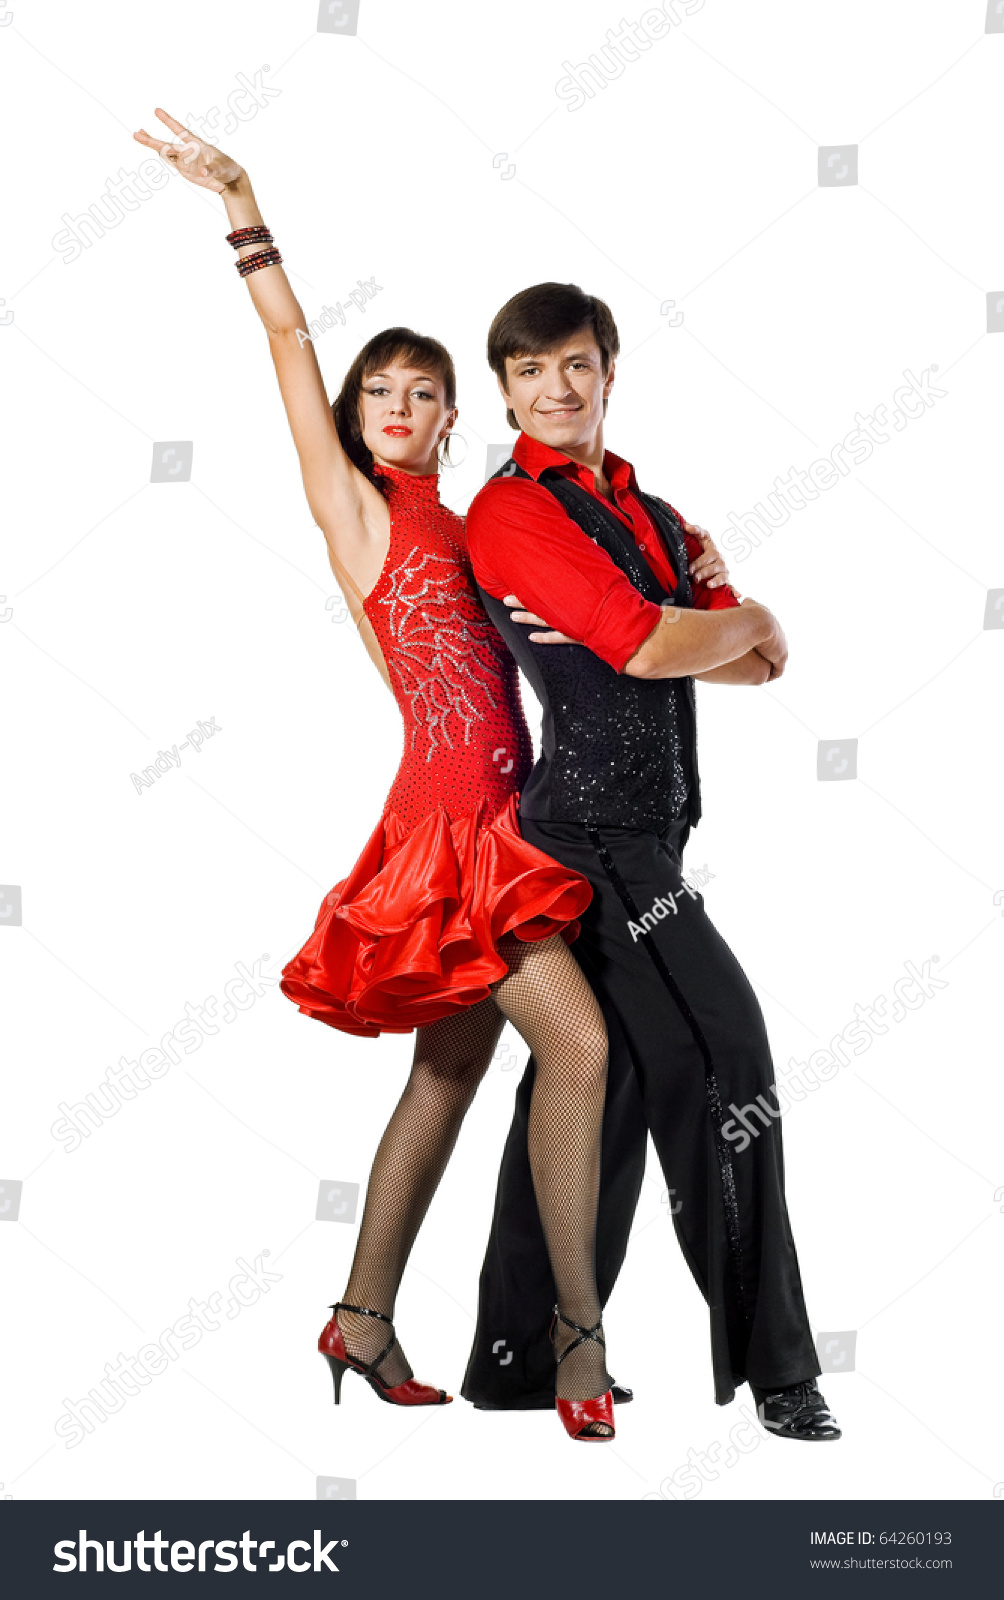 Portrait Of Two Young Tango Dancer Posing. Isolated Over White